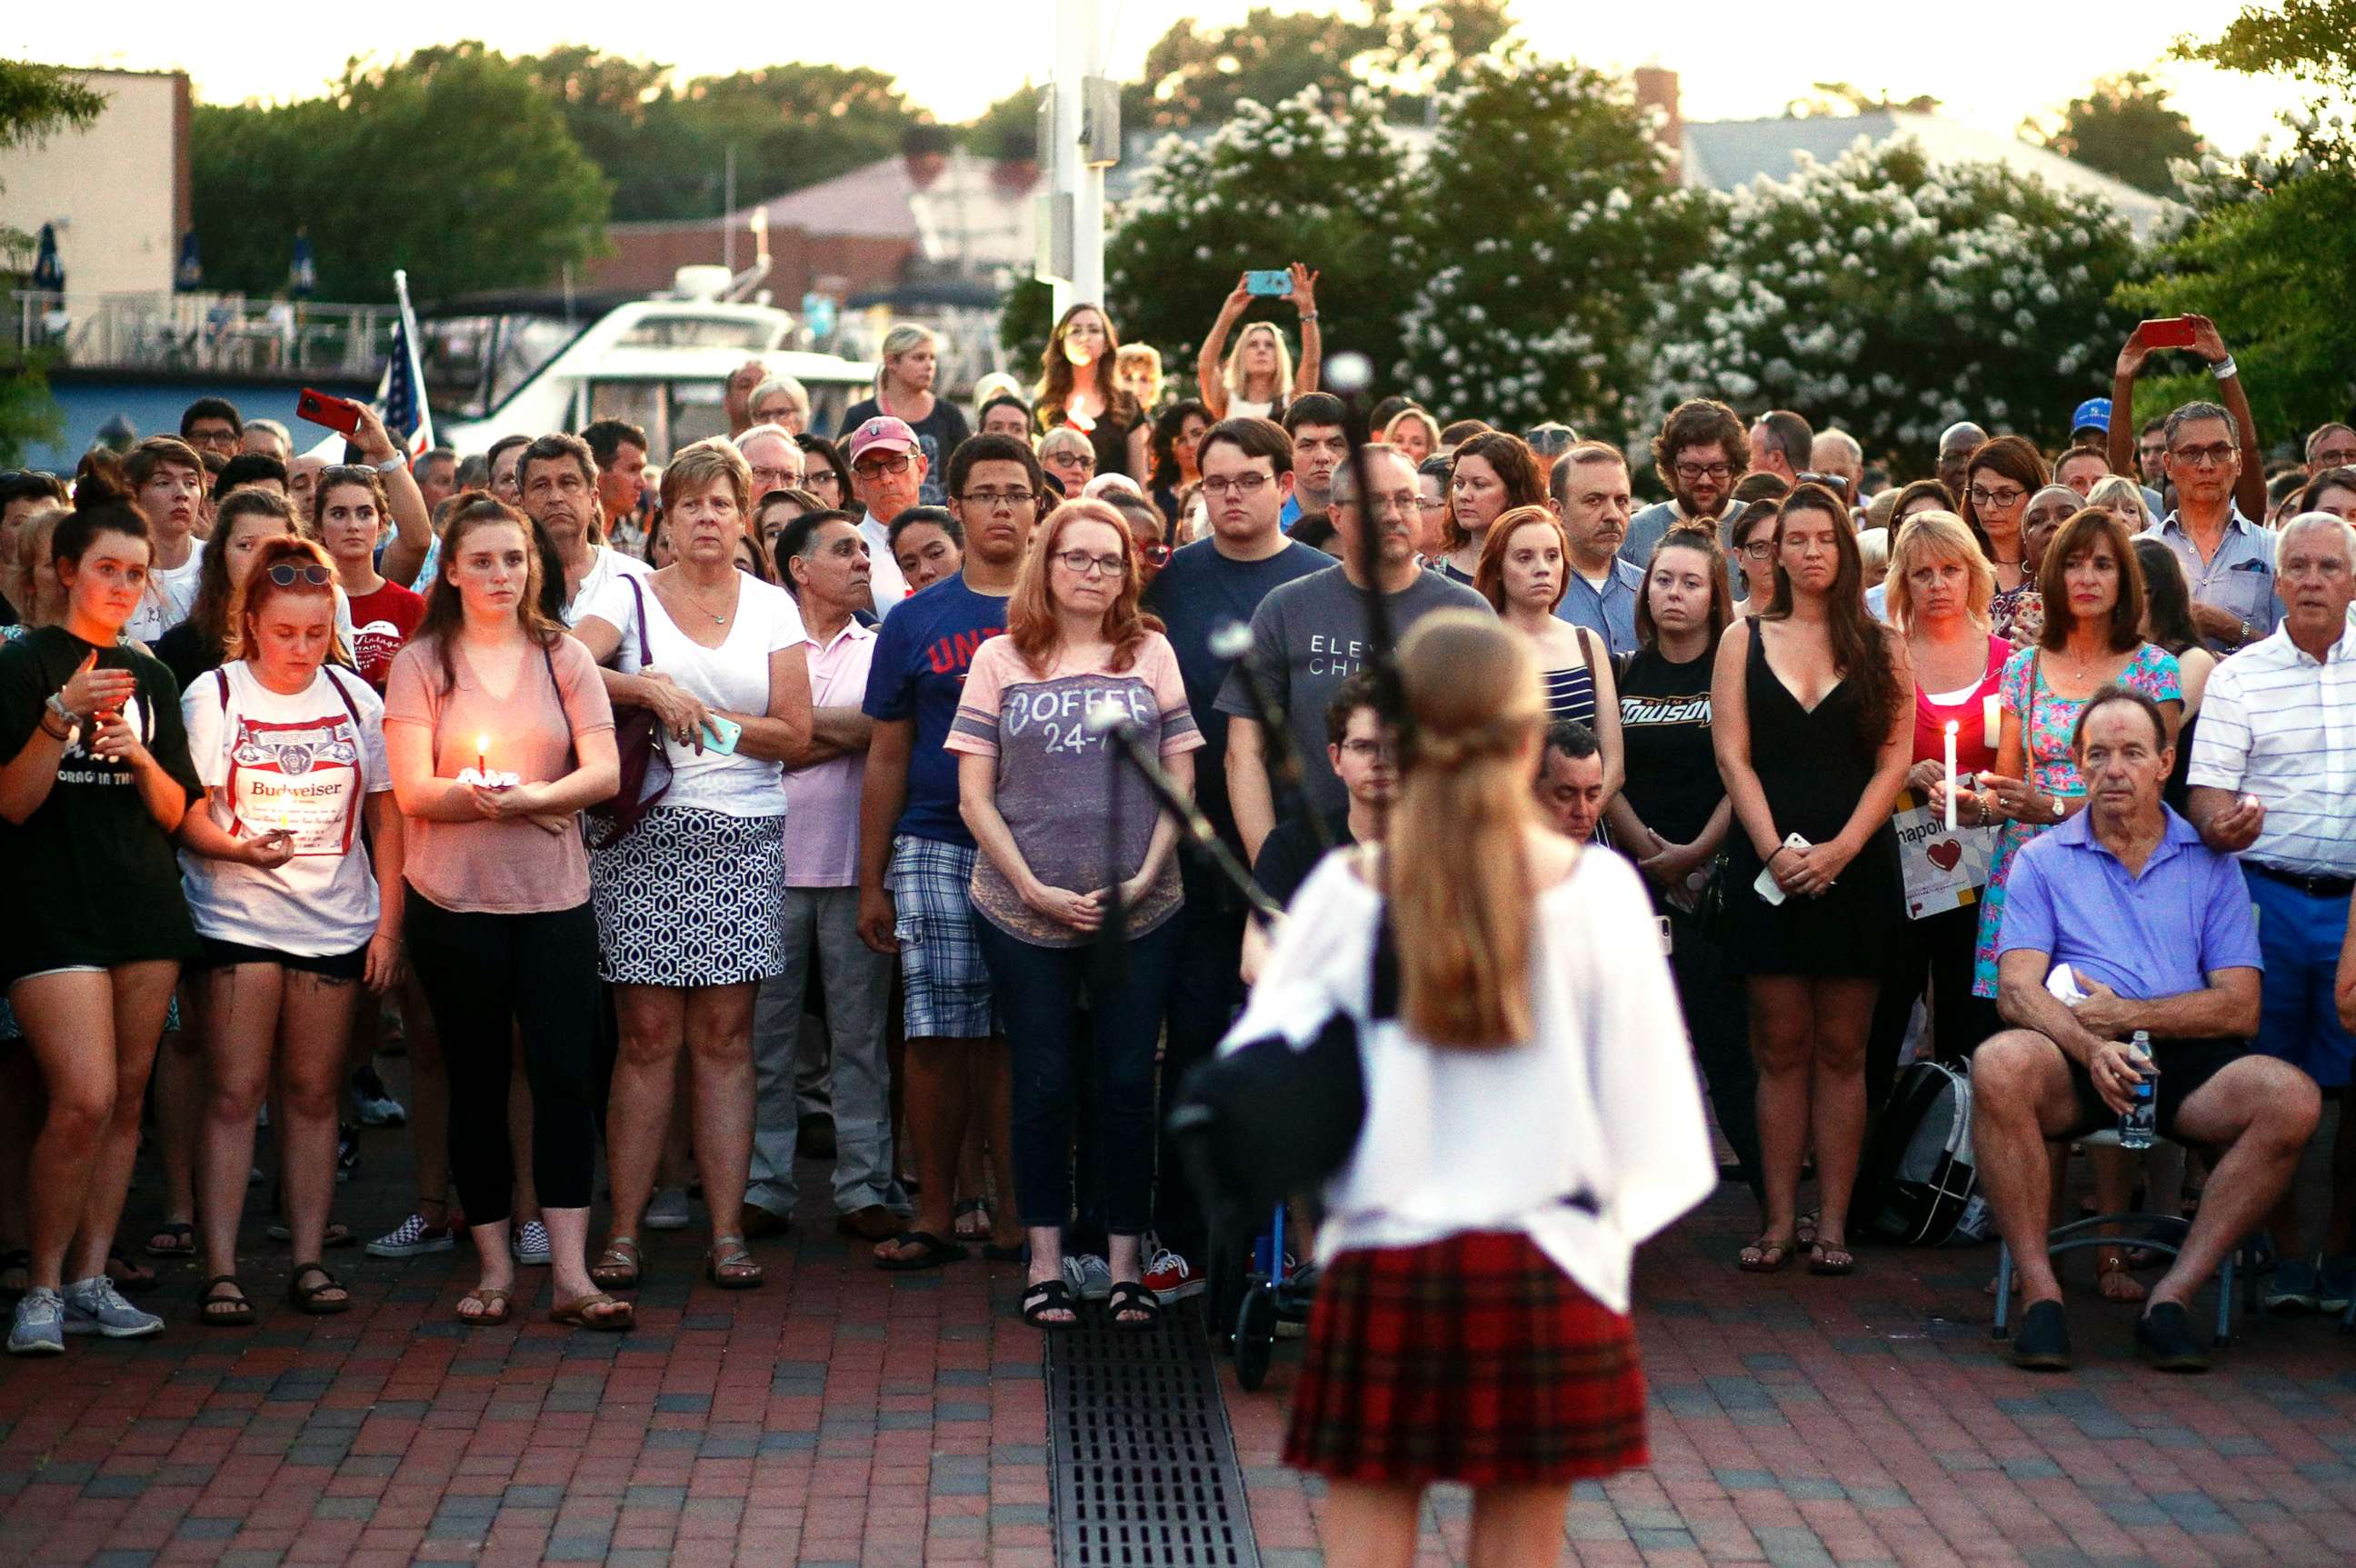 PHOTO: People listen to a bagpipe player during a vigil in response to a shooting in the Capital Gazette newspaper office on June 29, 2018, in Annapolis, Md.